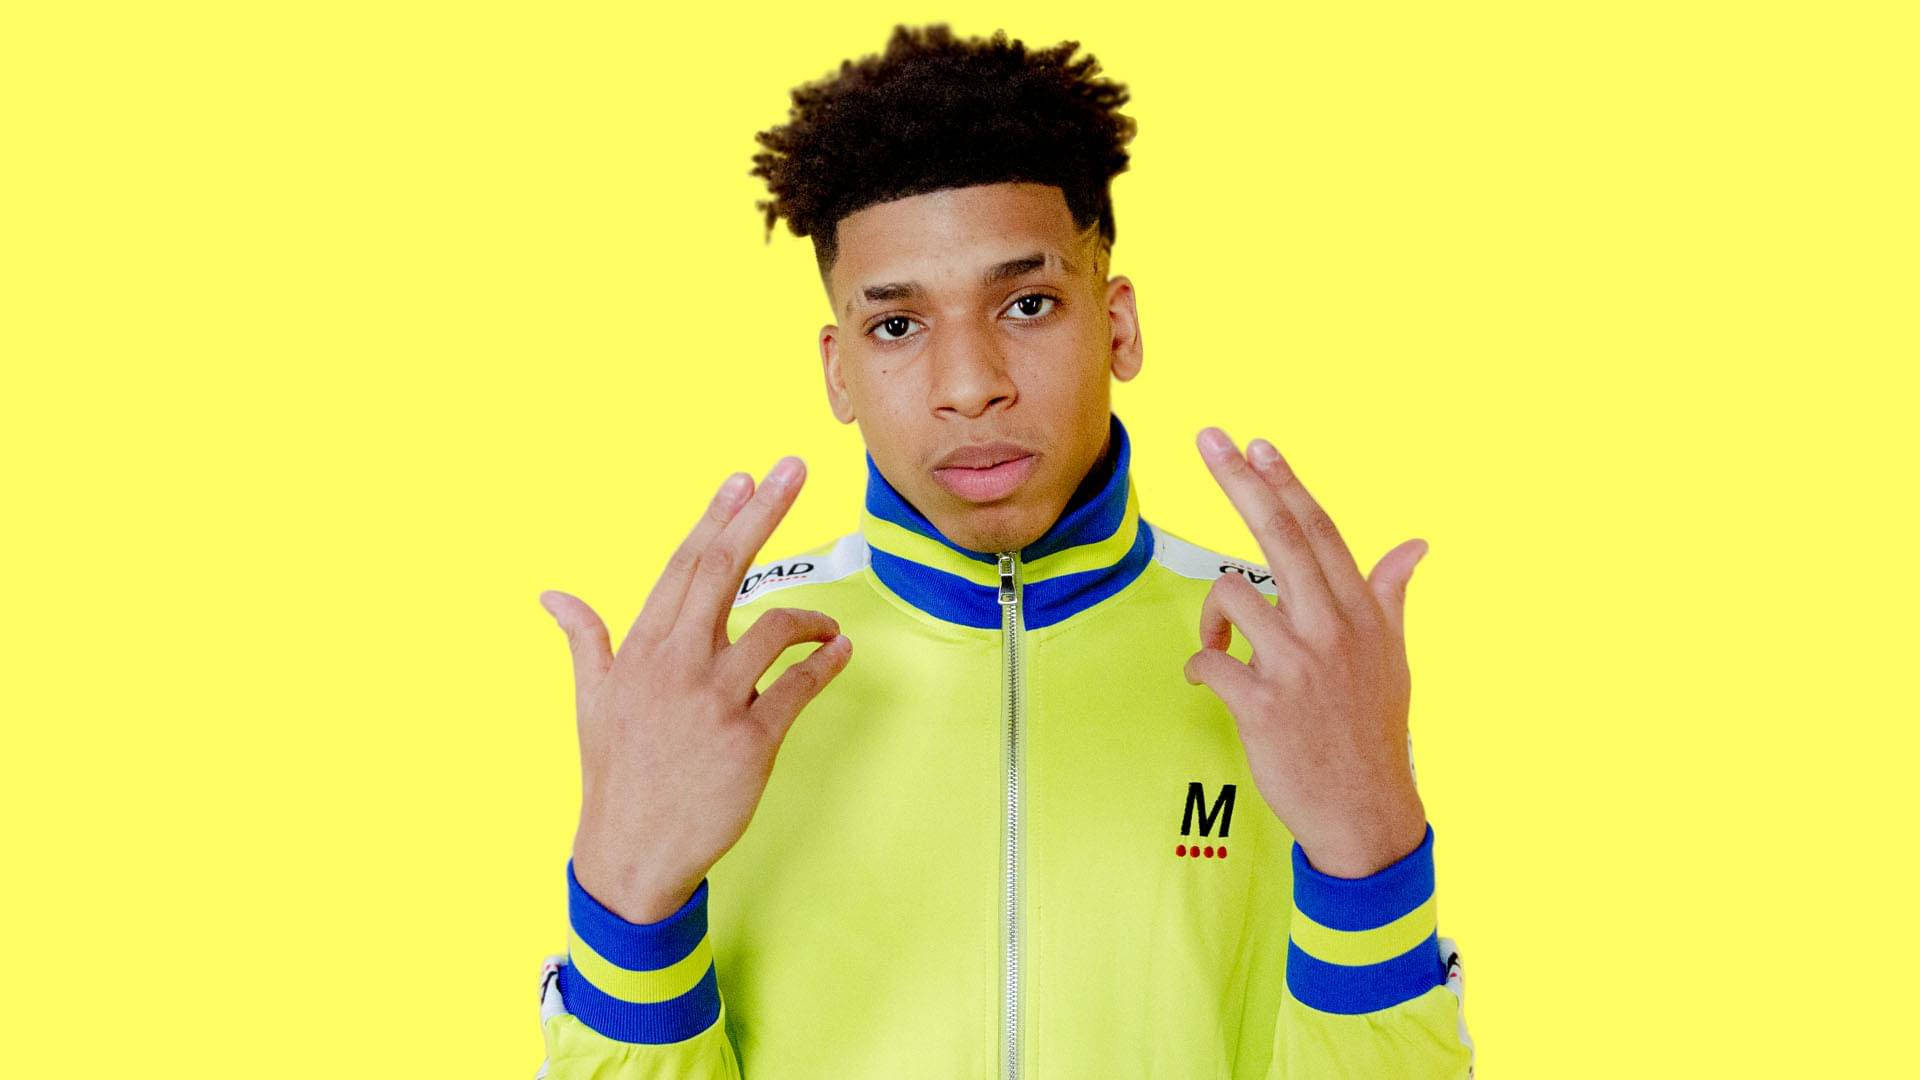 Rapper Nle Choppa Stands Ready With A Microphone.